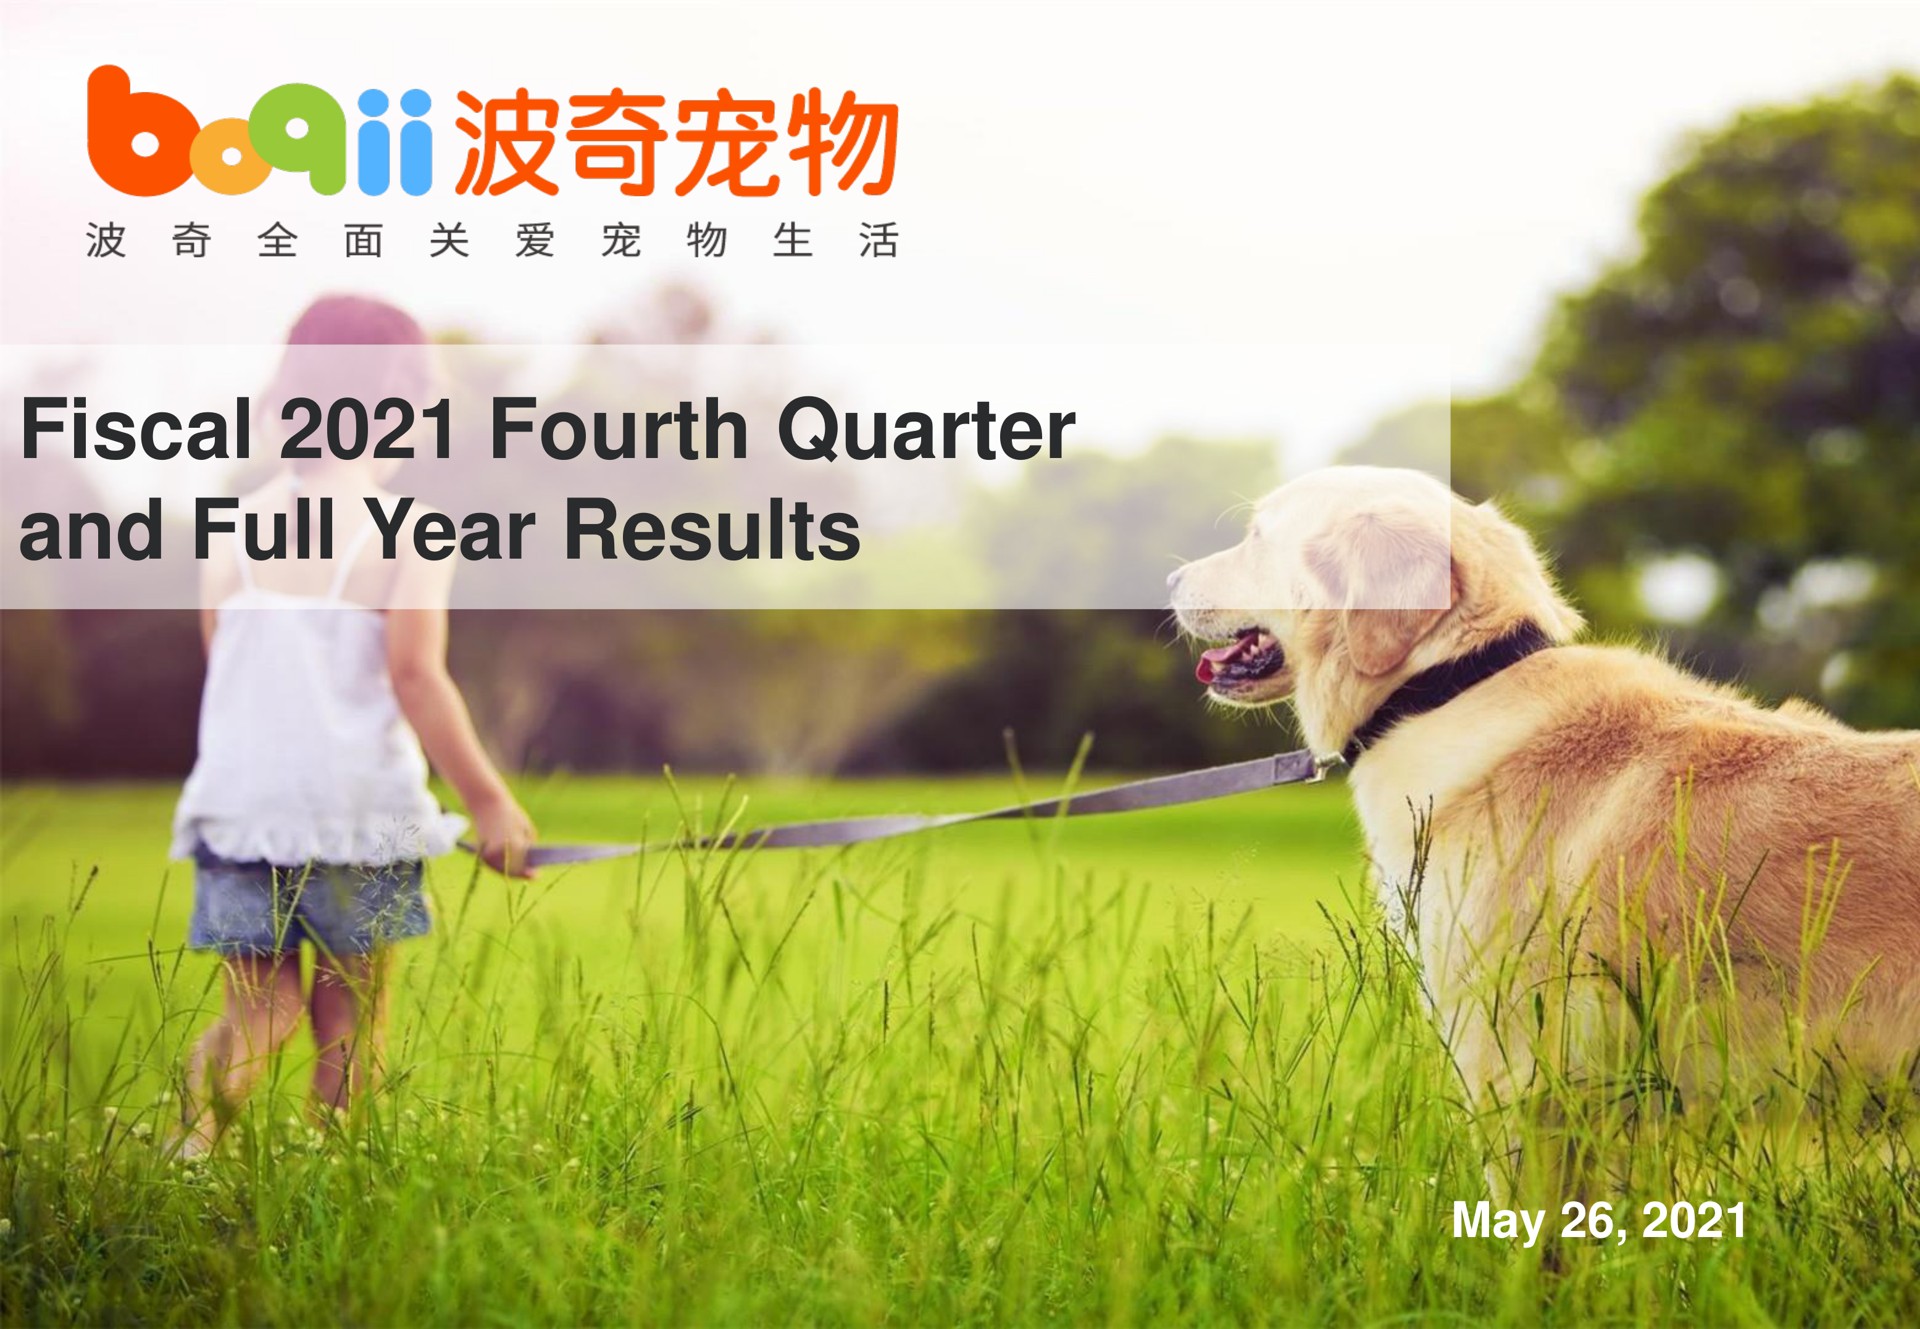 fiscal fourth quarter and full year results may | Boqii Holding